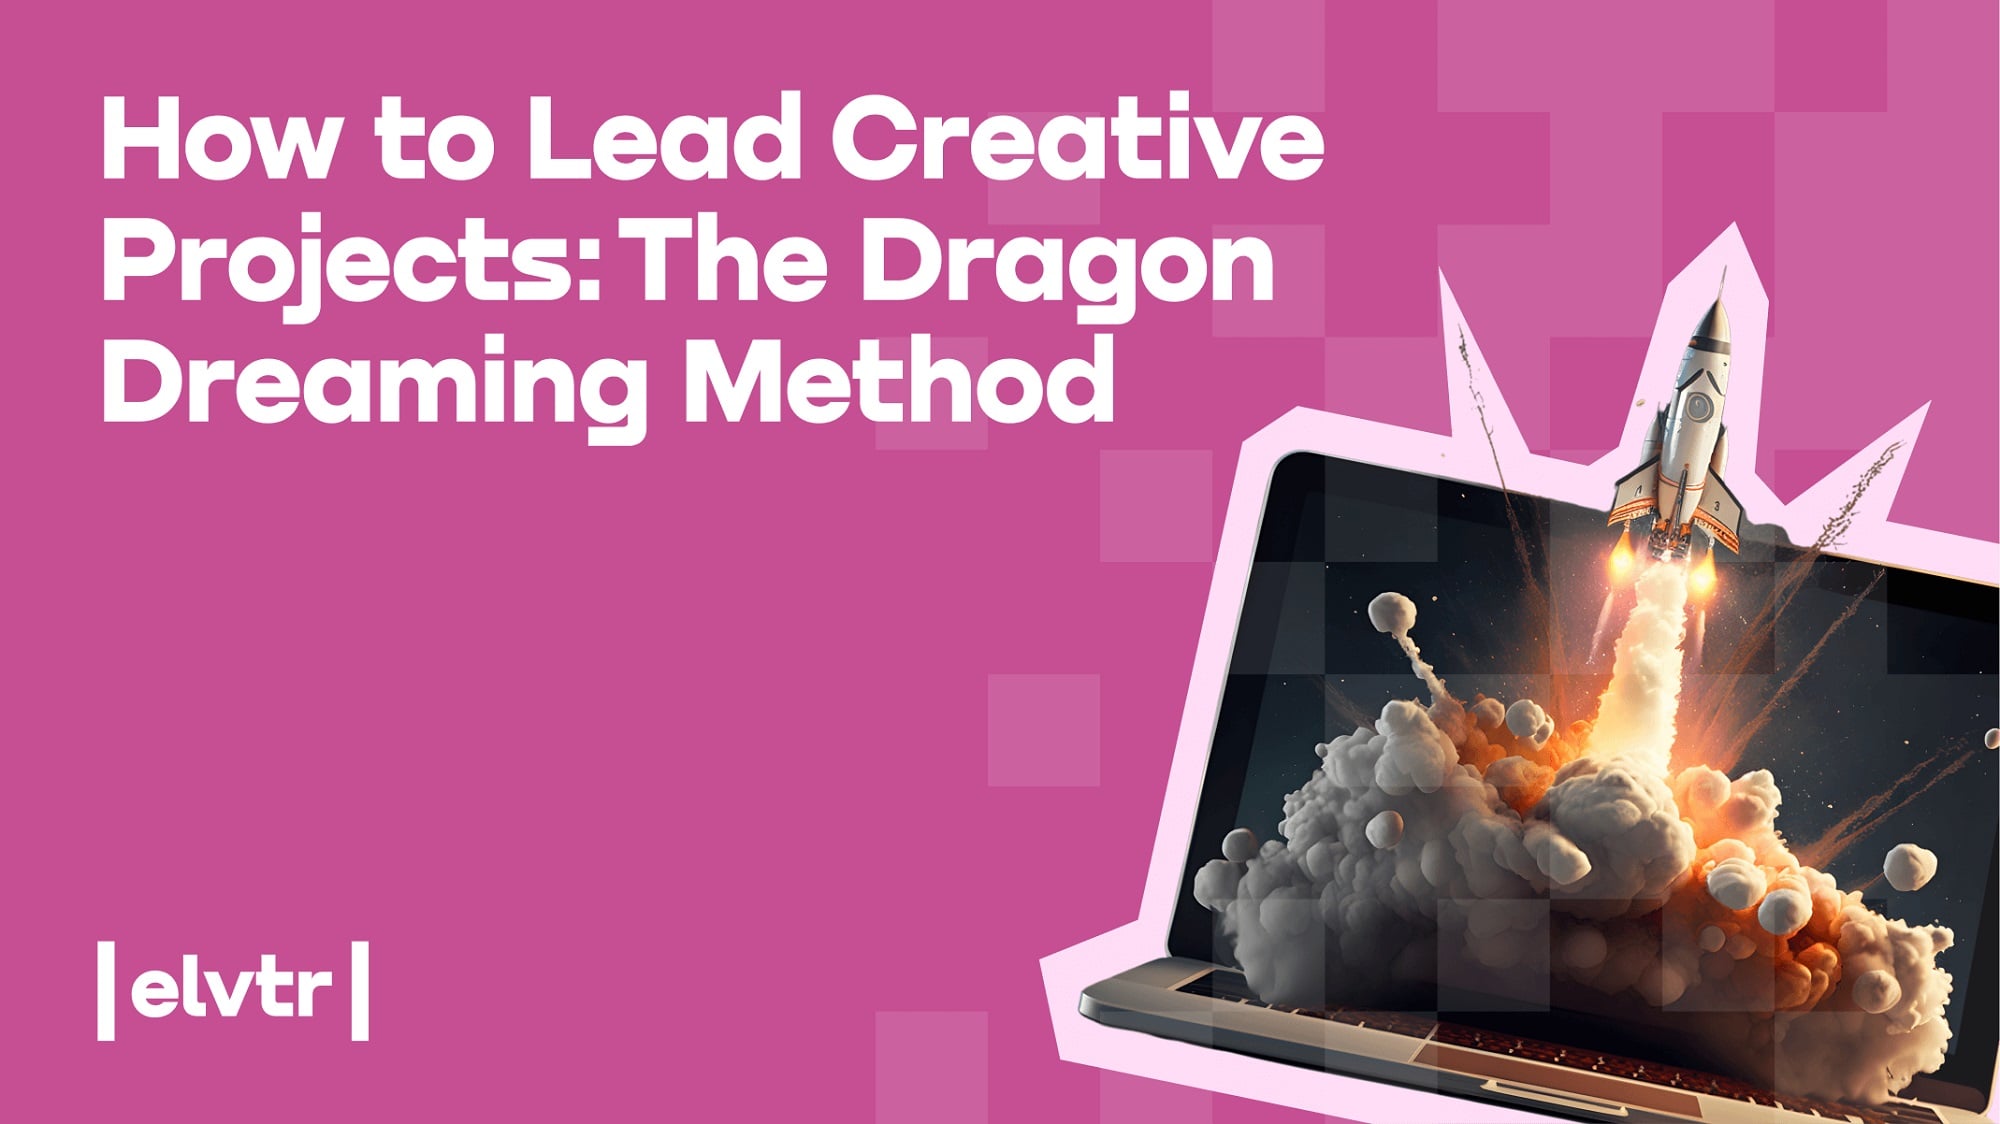 How to Lead Creative Projects: The Dragon Dreaming Method image